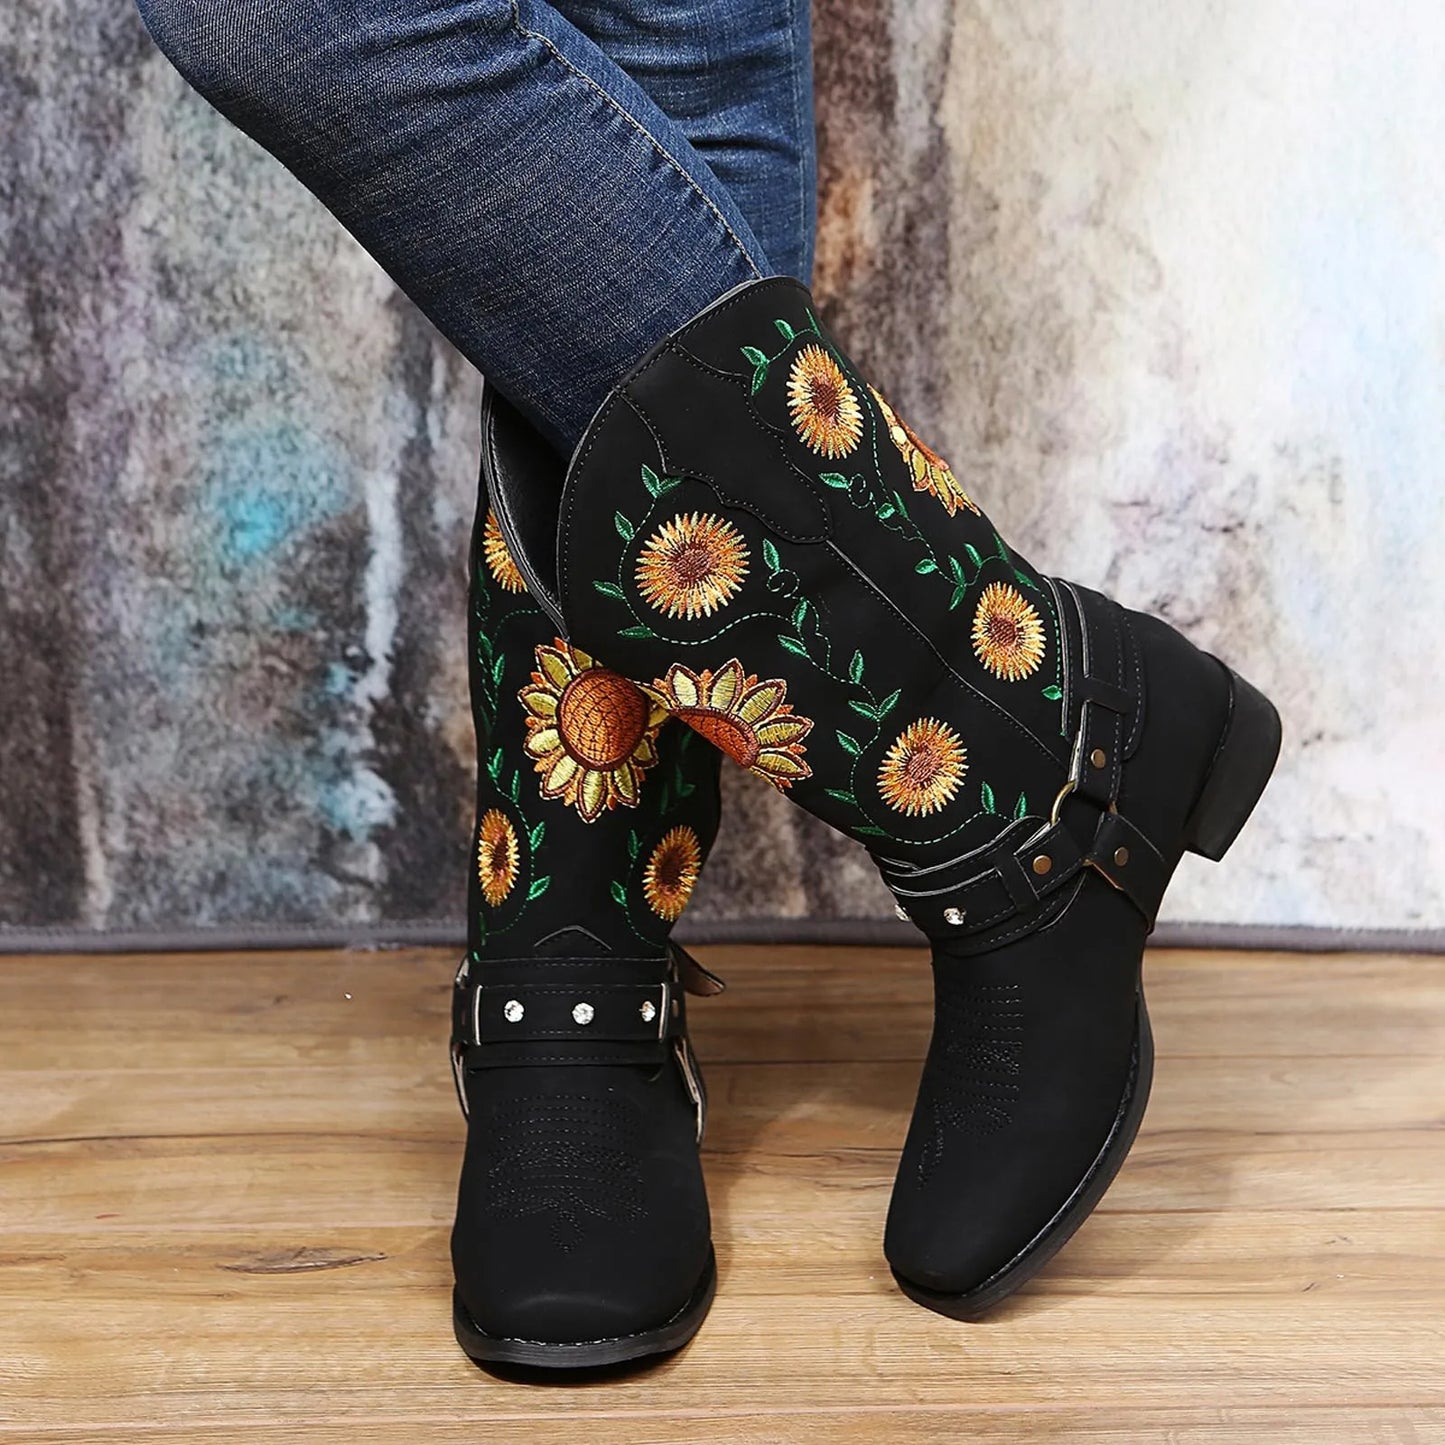 Sunflower Embroidered Western Boots